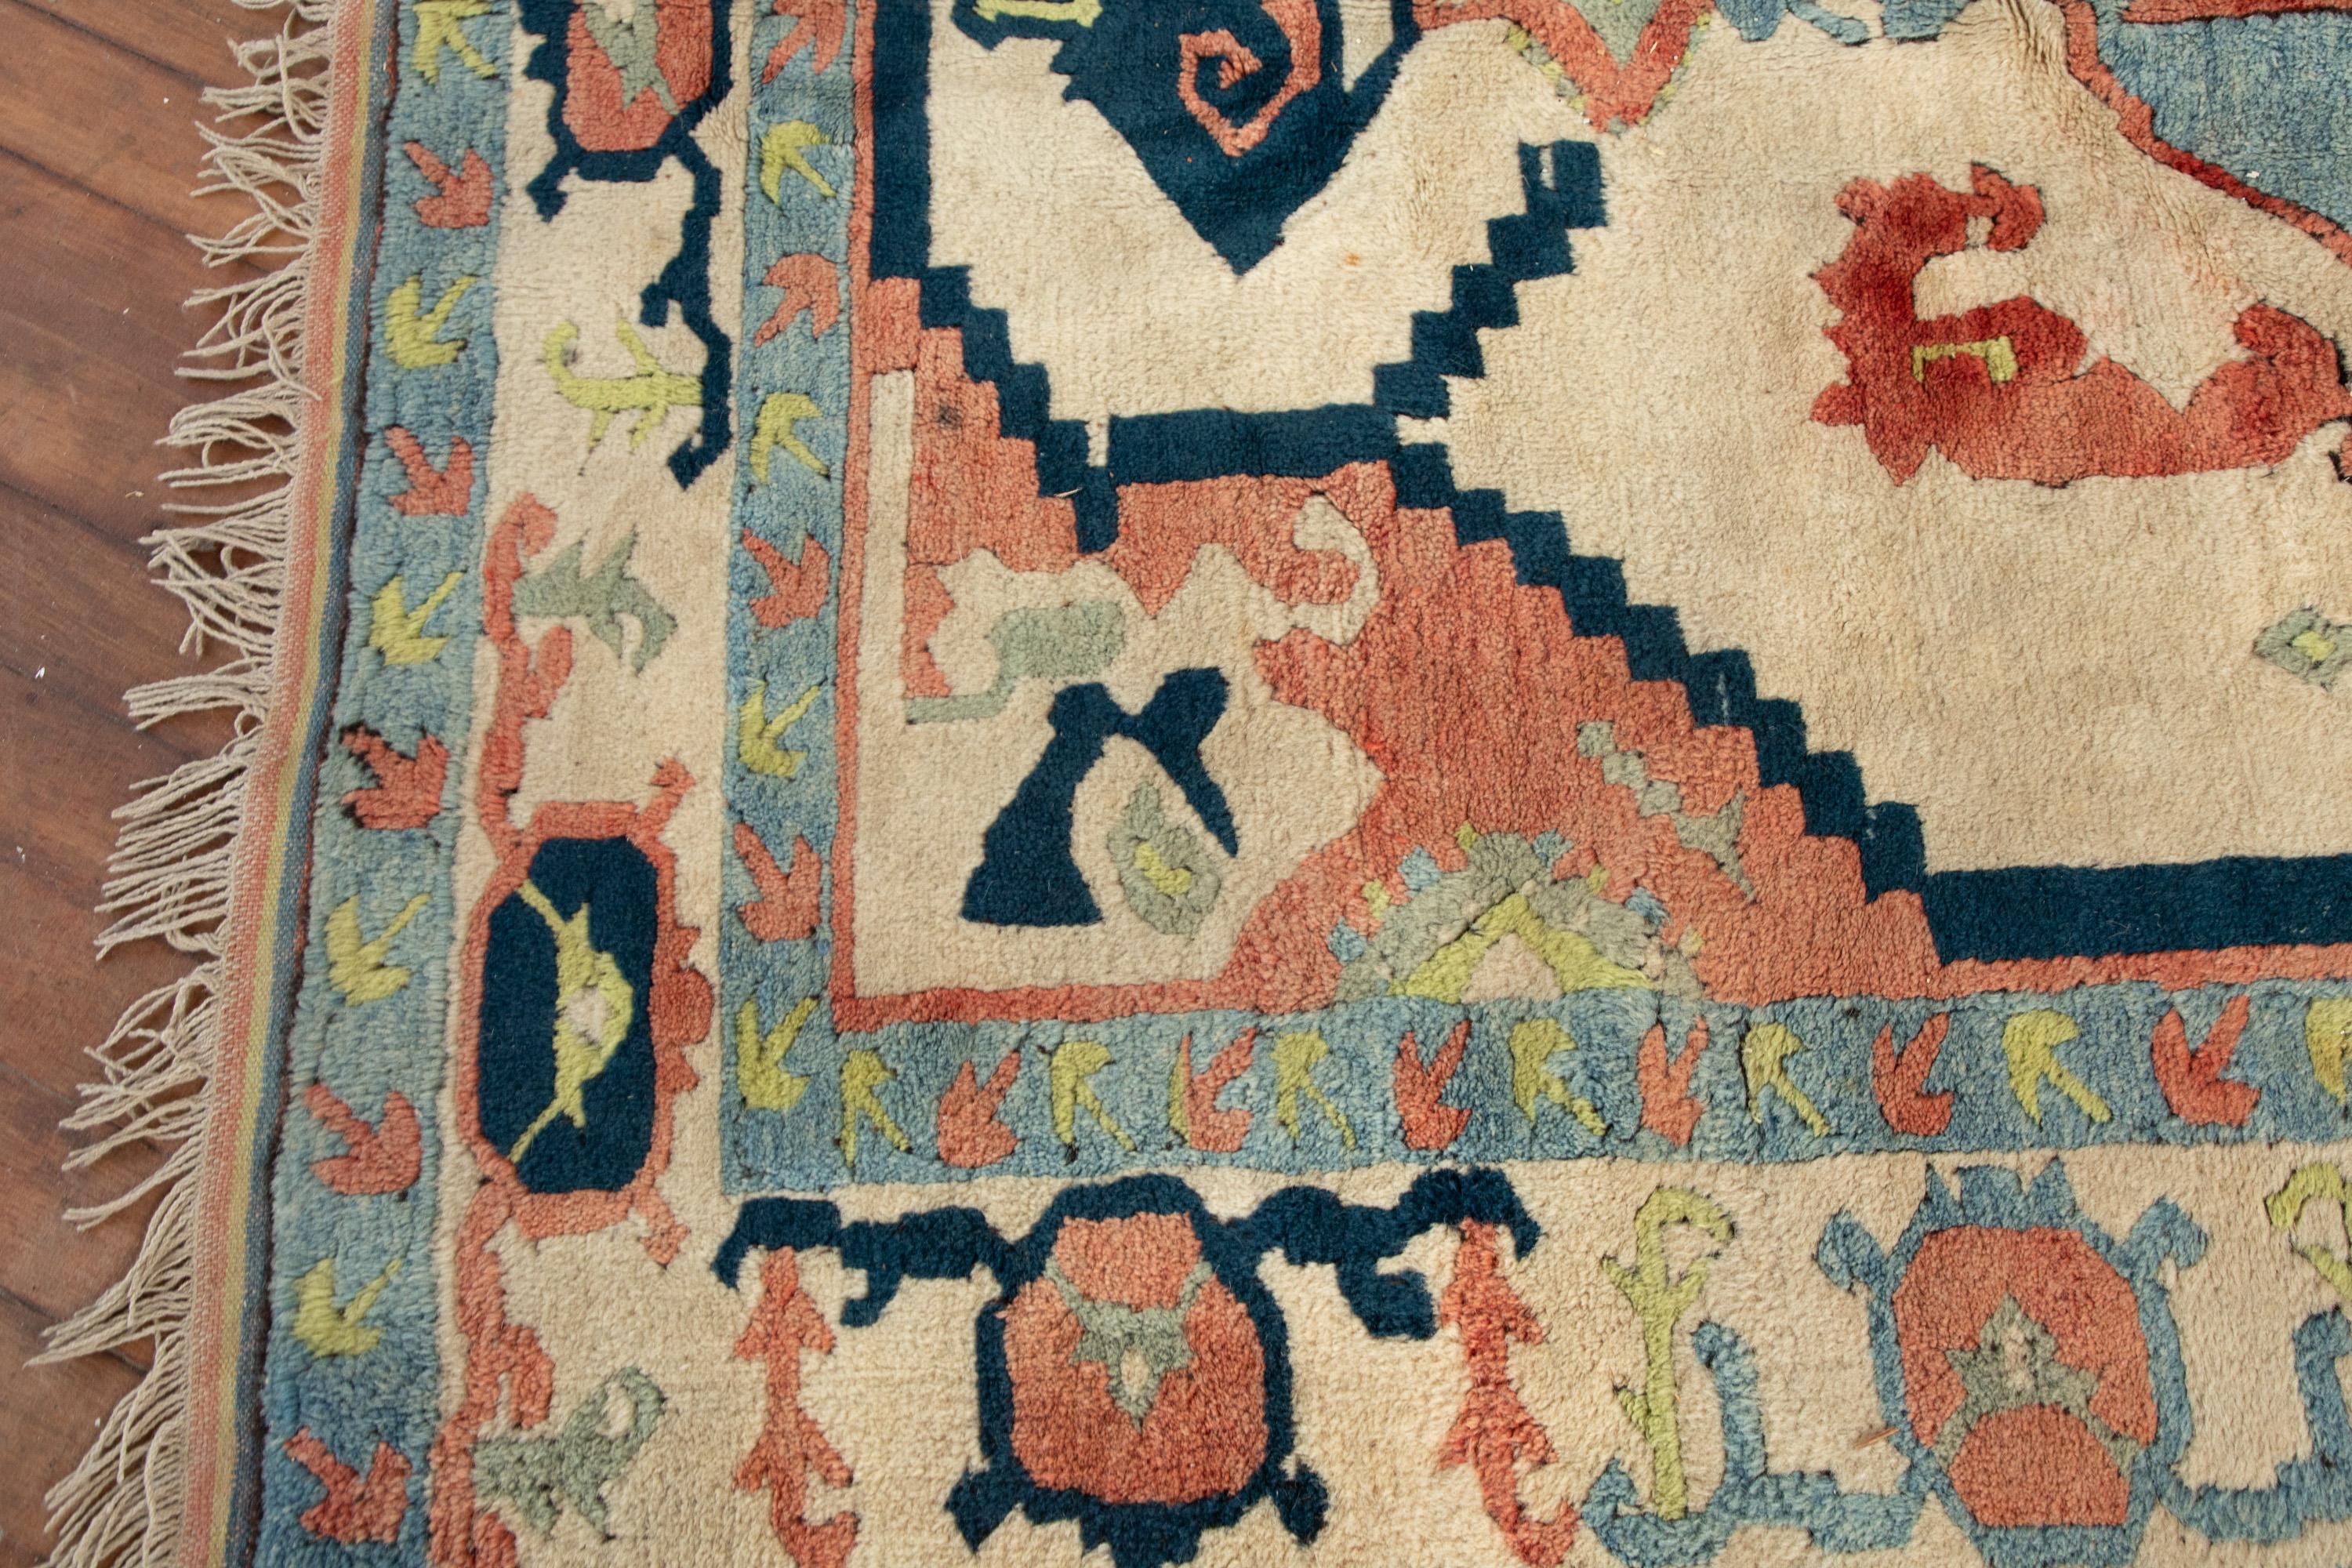 Traditional Oushak rug.
Hand knotted wool rug with a classic vibrant colourful design.

Cream background with a sky blue, navy blue, lime green and a earthy pink/peach design. Uplifting colour way great for a modern traditional interior.
Great size